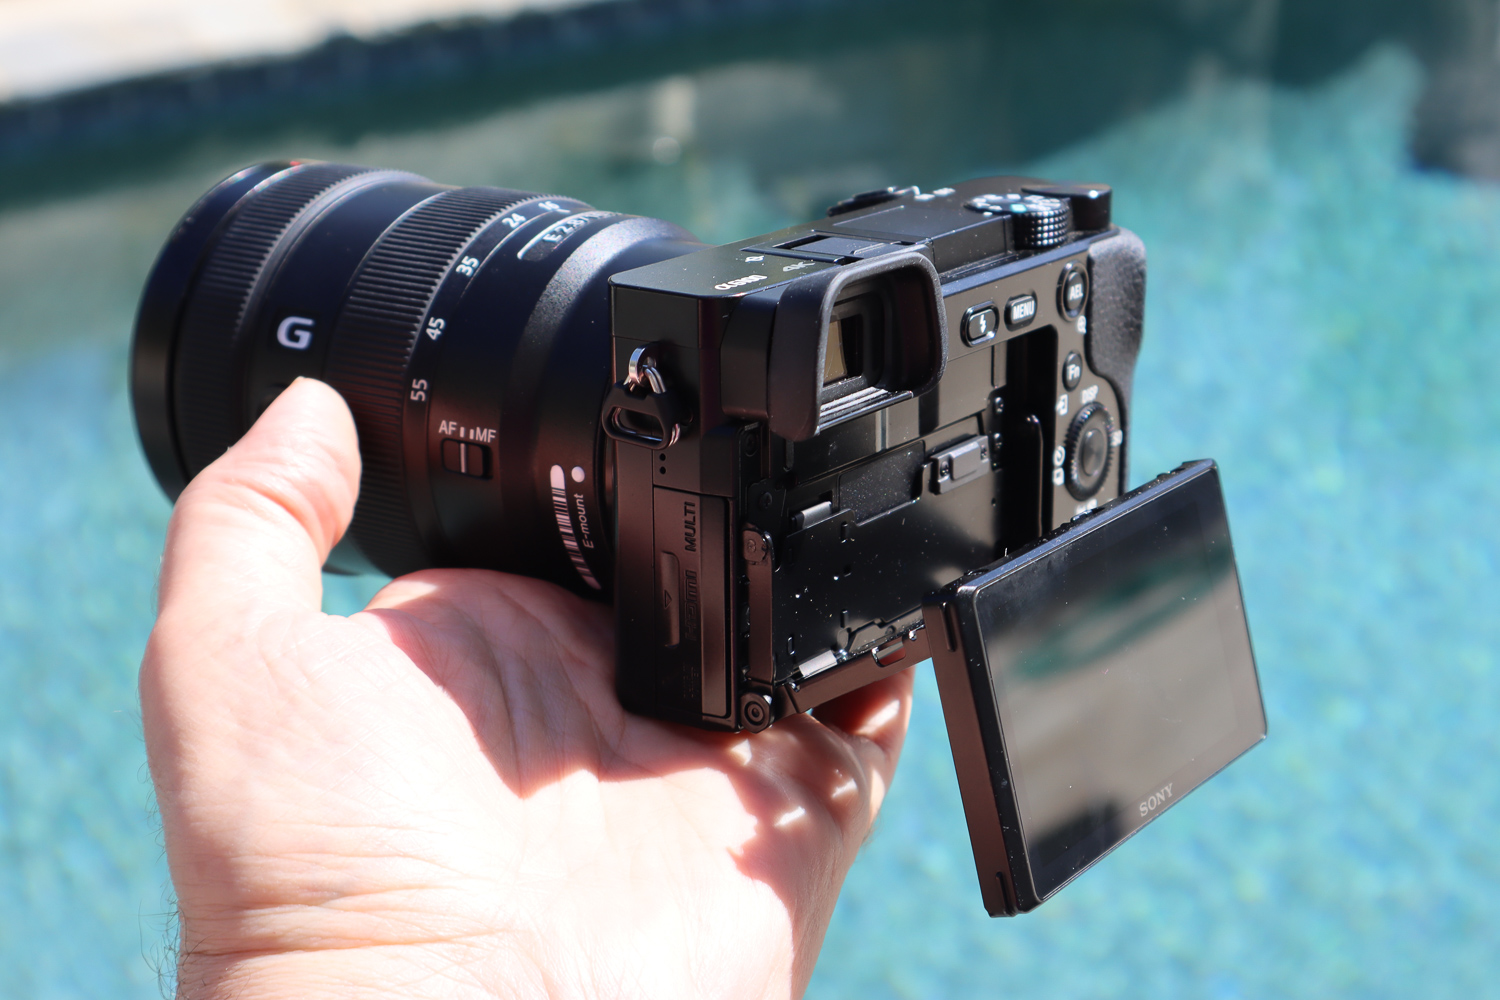 Sony A6100 Review  This Entry-Level Camera Has Everything You